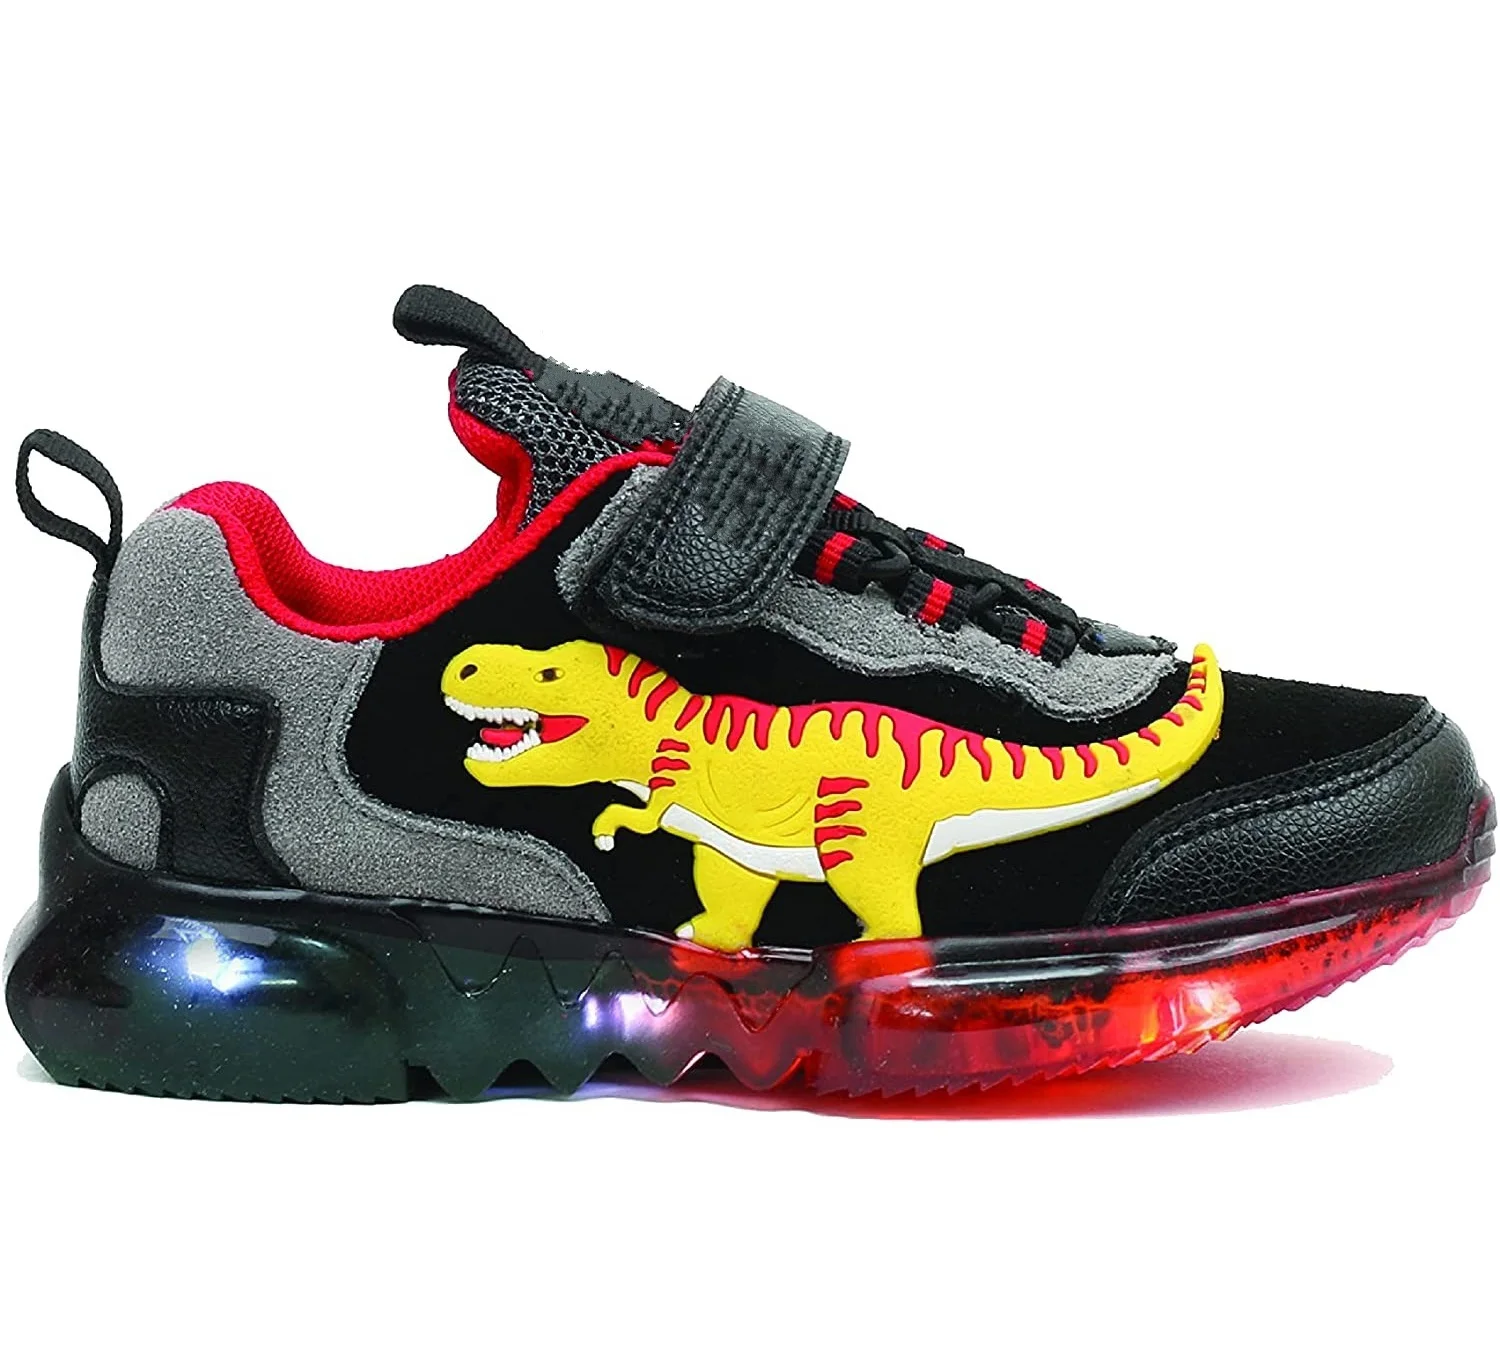 call out Maxim Painting Blinking Led Low-top Shoes For Children,Lightweight And Breathable Casual  Sneakers With Blinking Eyes For Dinosaurs - Buy Led Low-top  Shoes,Lightweight Children Shoes,Children's Lighting Shoes Product on  Alibaba.com